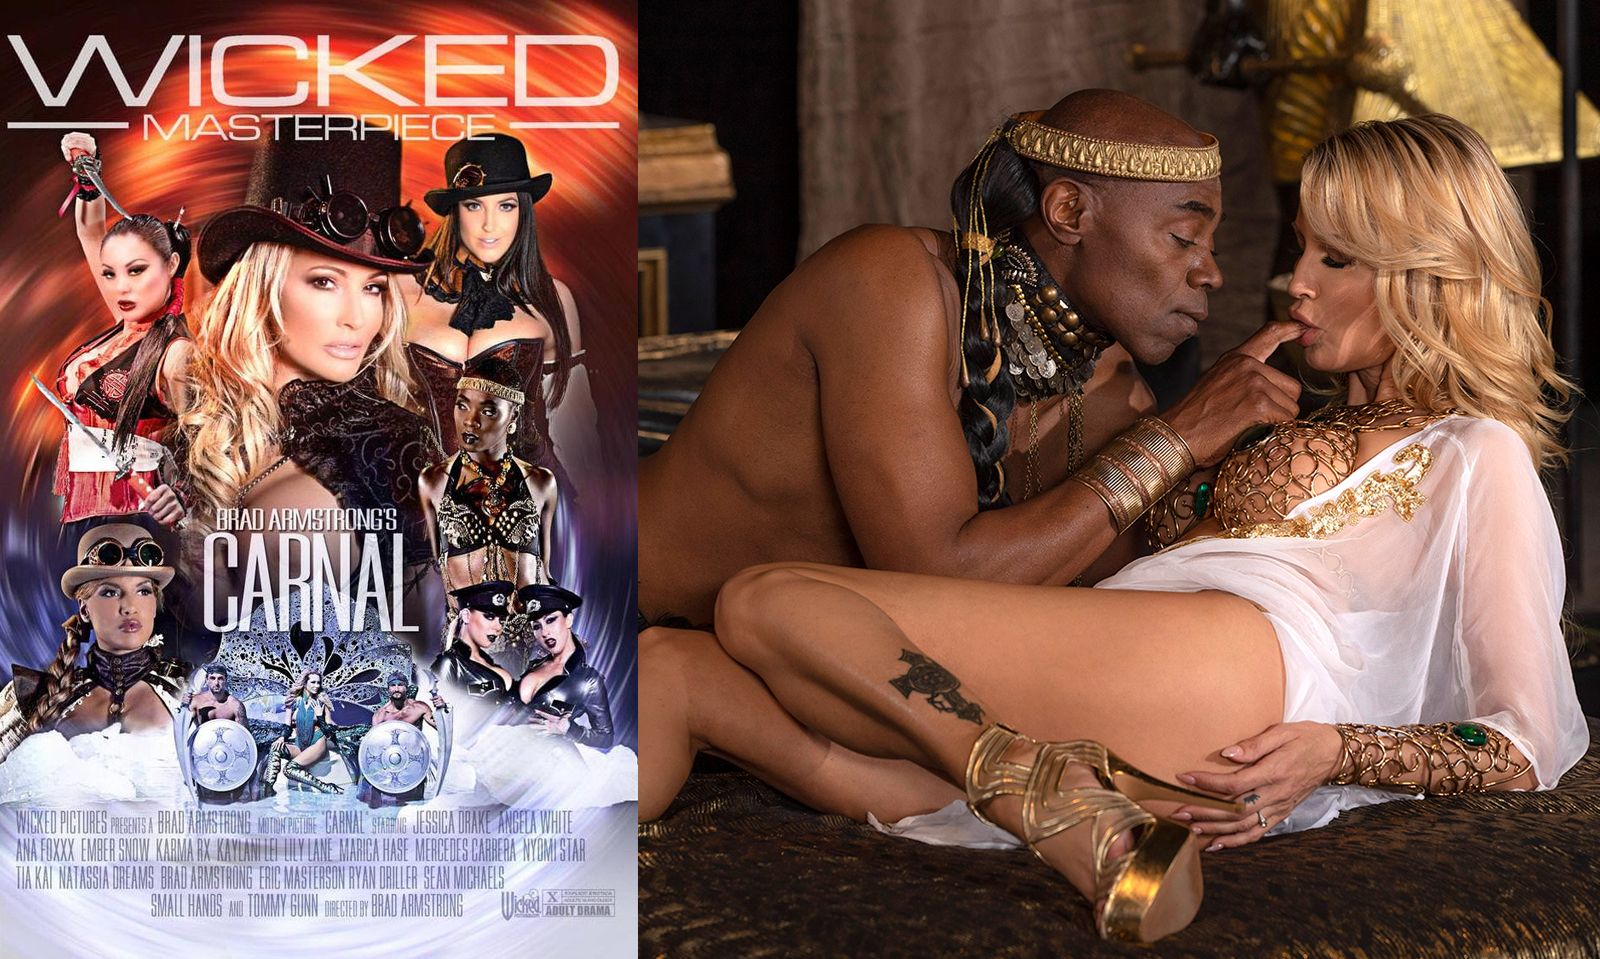 Carnal Jessica 2018 Sex Wicked - Wicked Launches Armstrong's 'Carnal' With Social Media Campaign | AVN